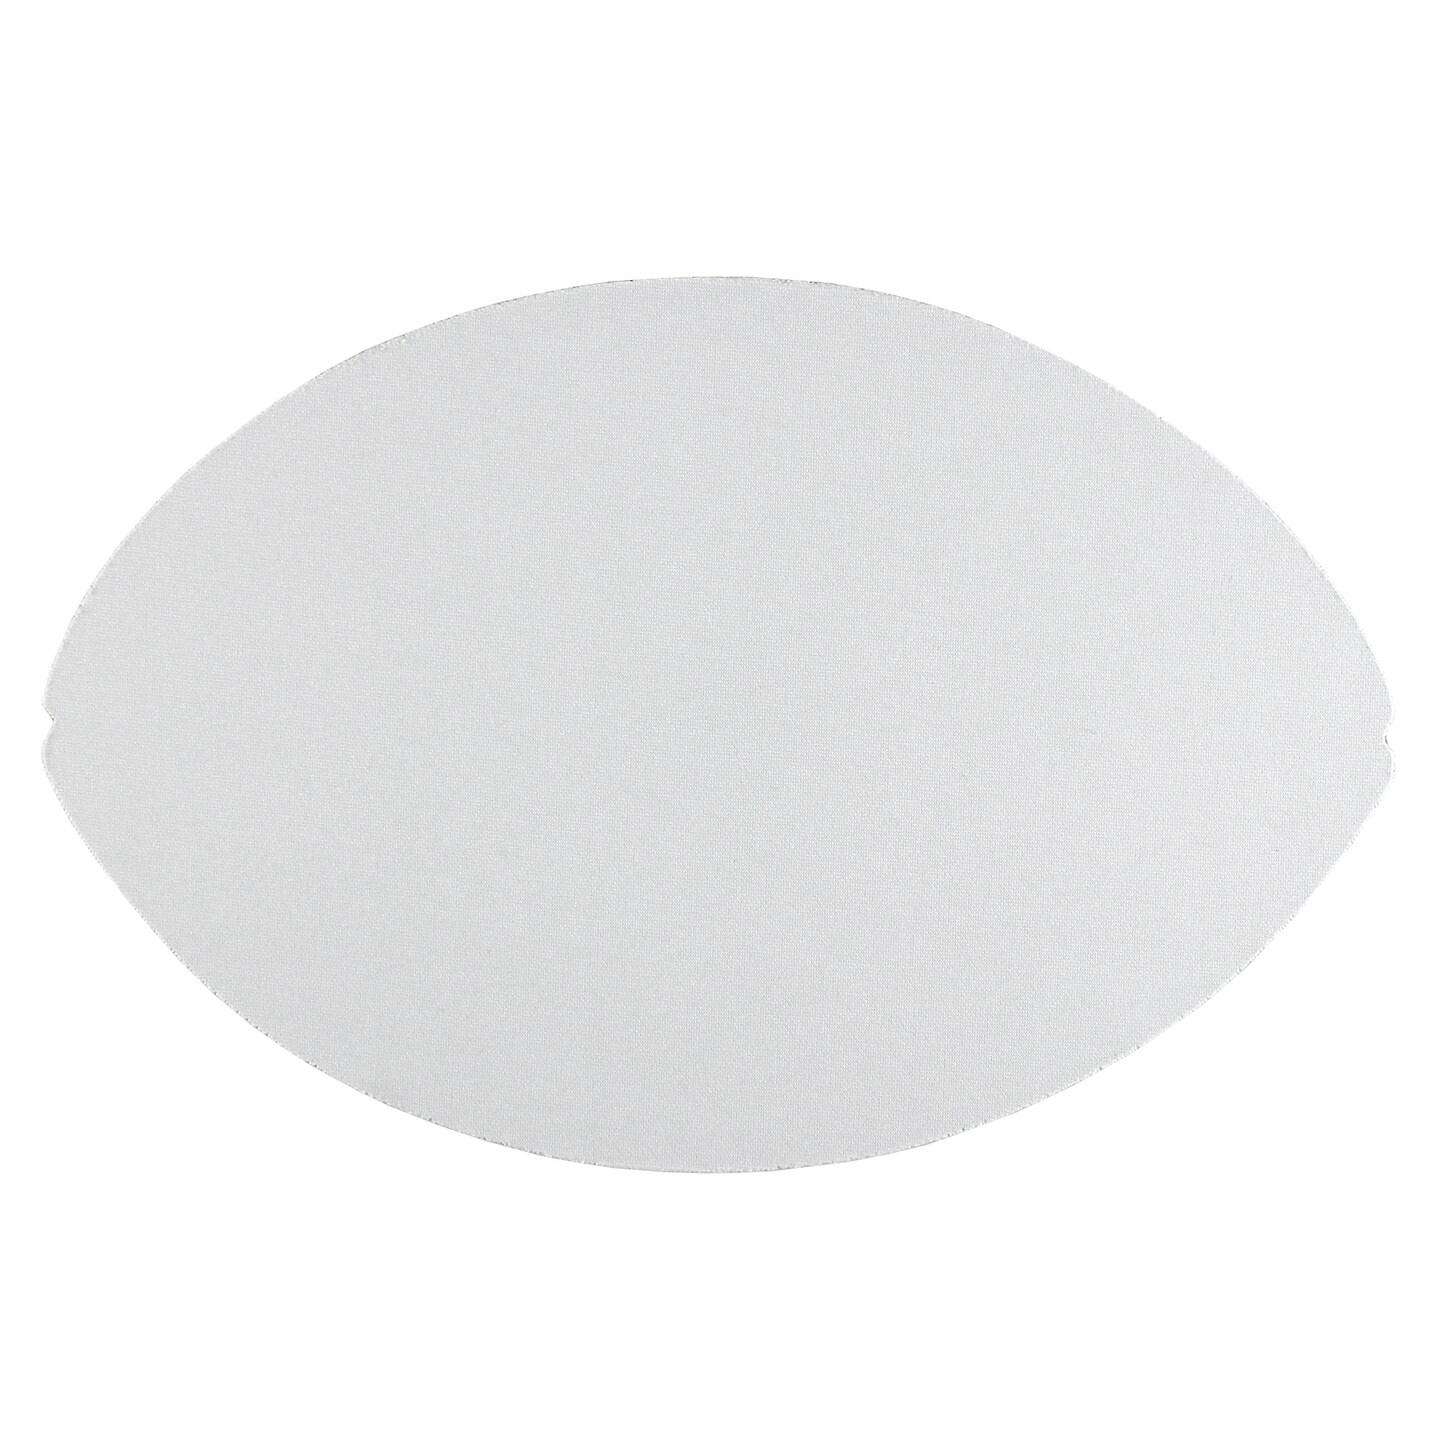 Football Mouse Pad Sublimation Blank Sublimation Blank Sports